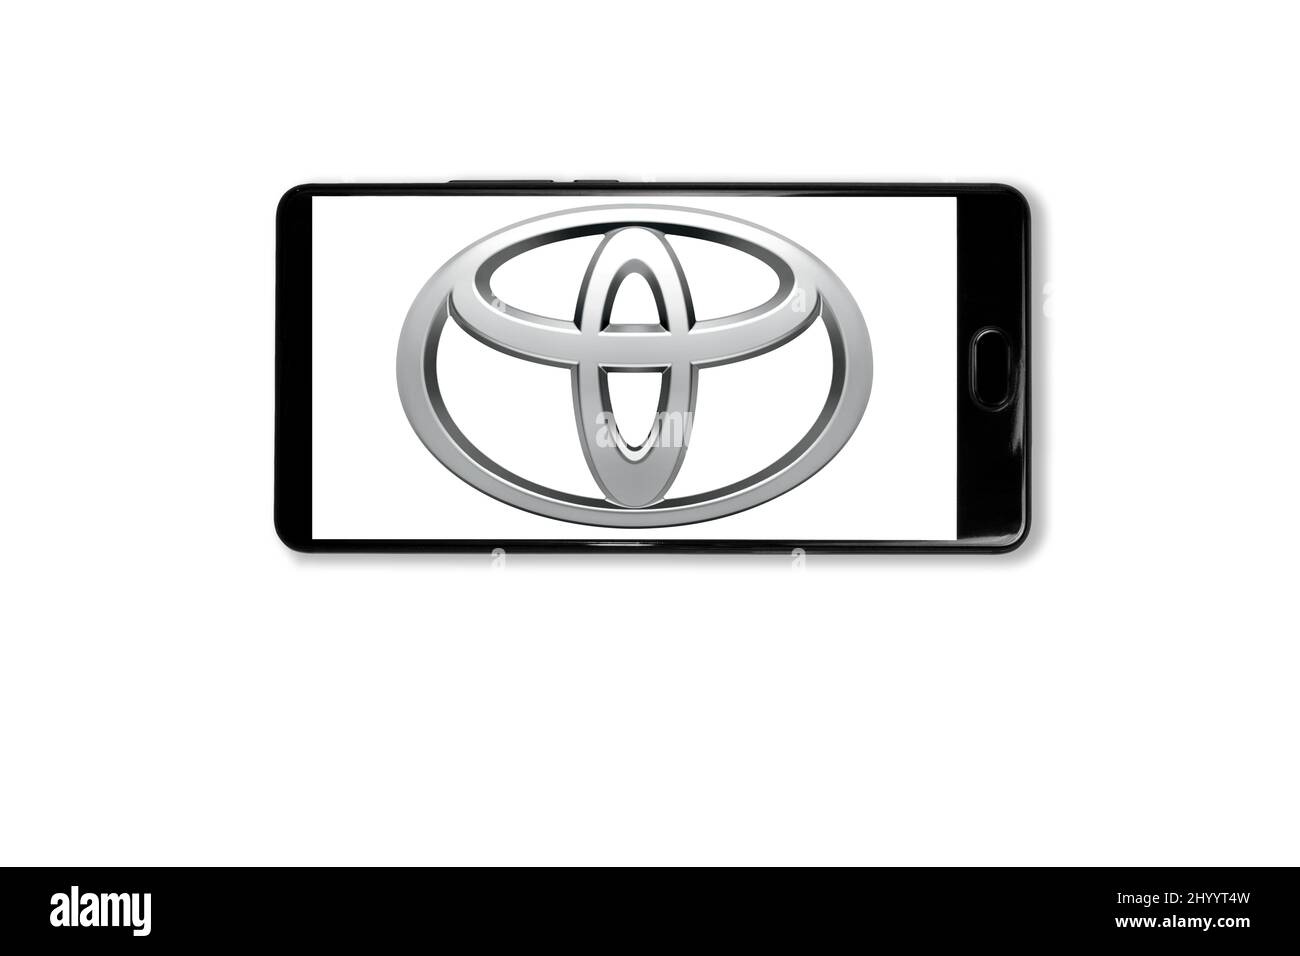 Kostanay, Kazakhstan, March 15, 2022.Mobile phone with Toyota logo on screen.Shot in studio on white background Stock Photo